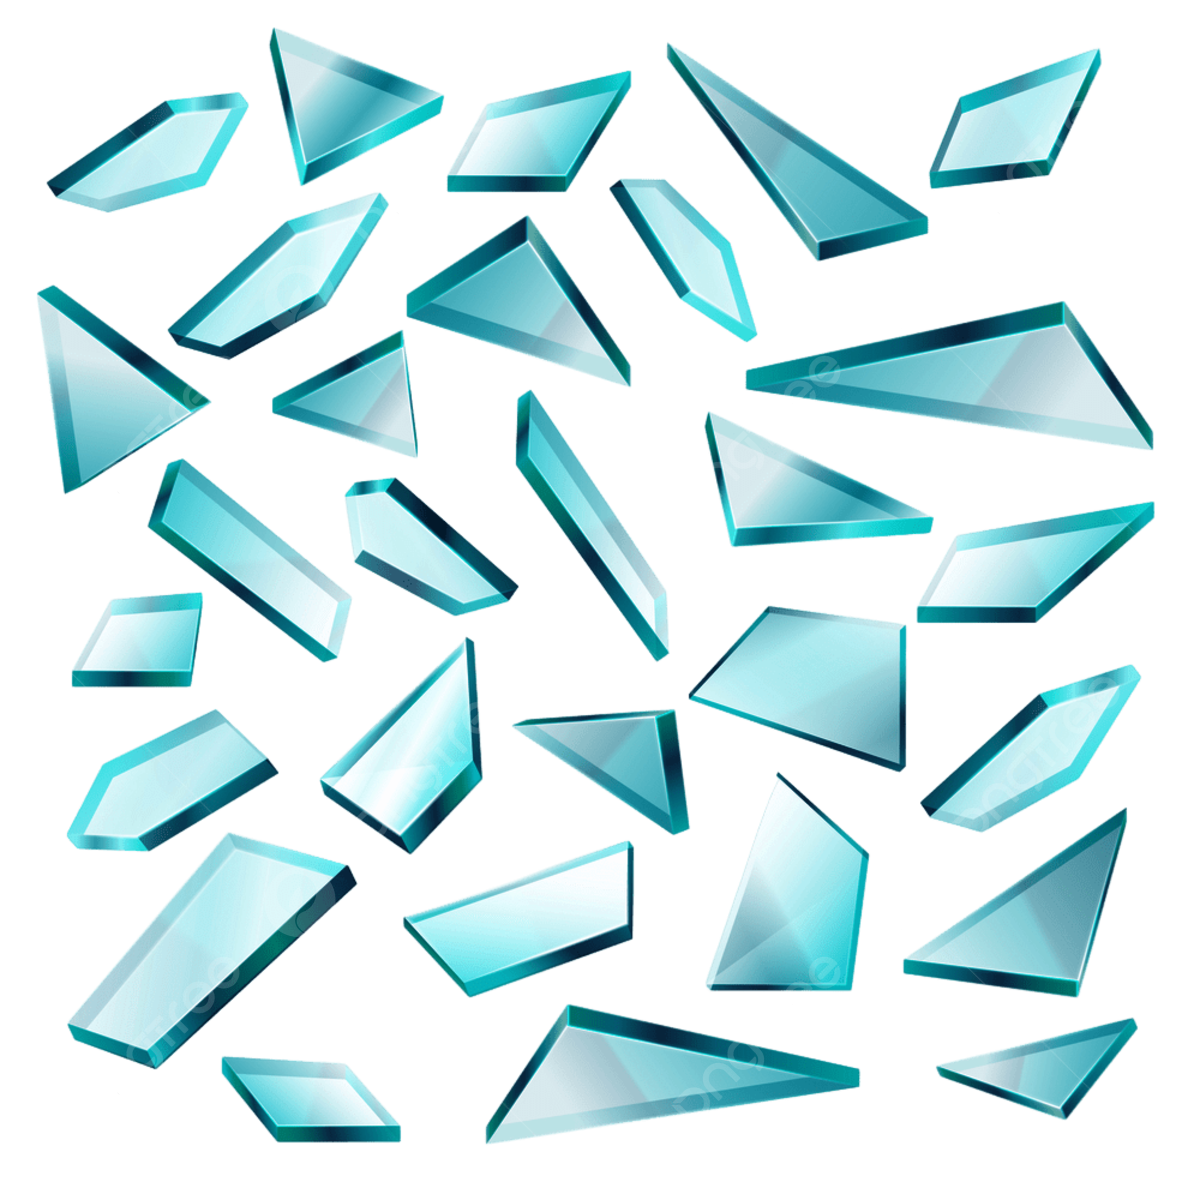 Glass Shards PNG HD Image